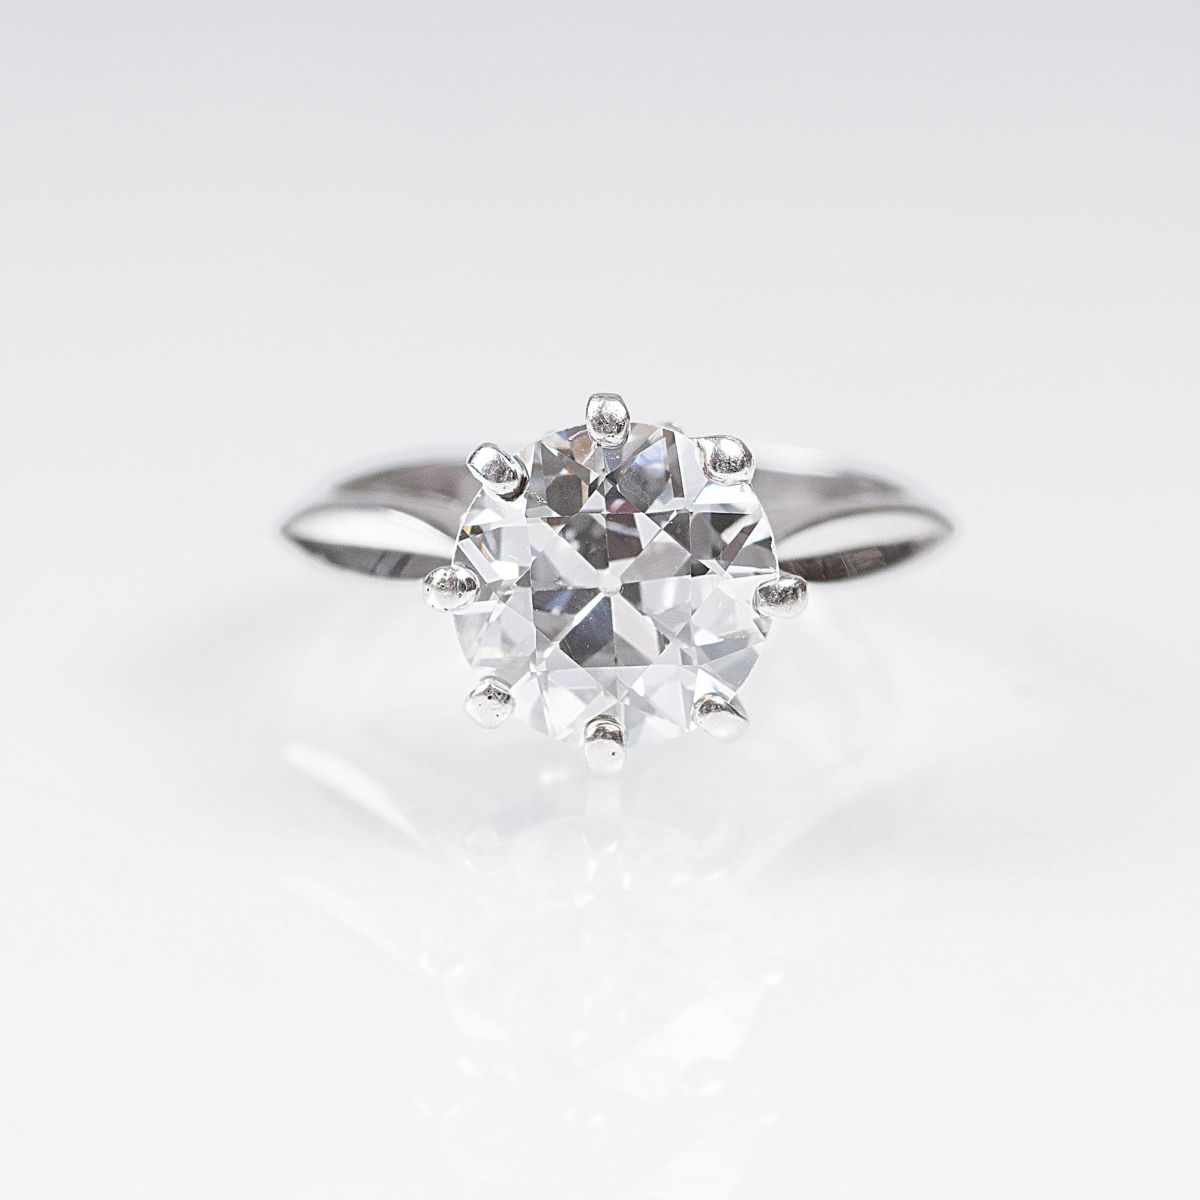 A Highcarat Diamond Solitaire Ring